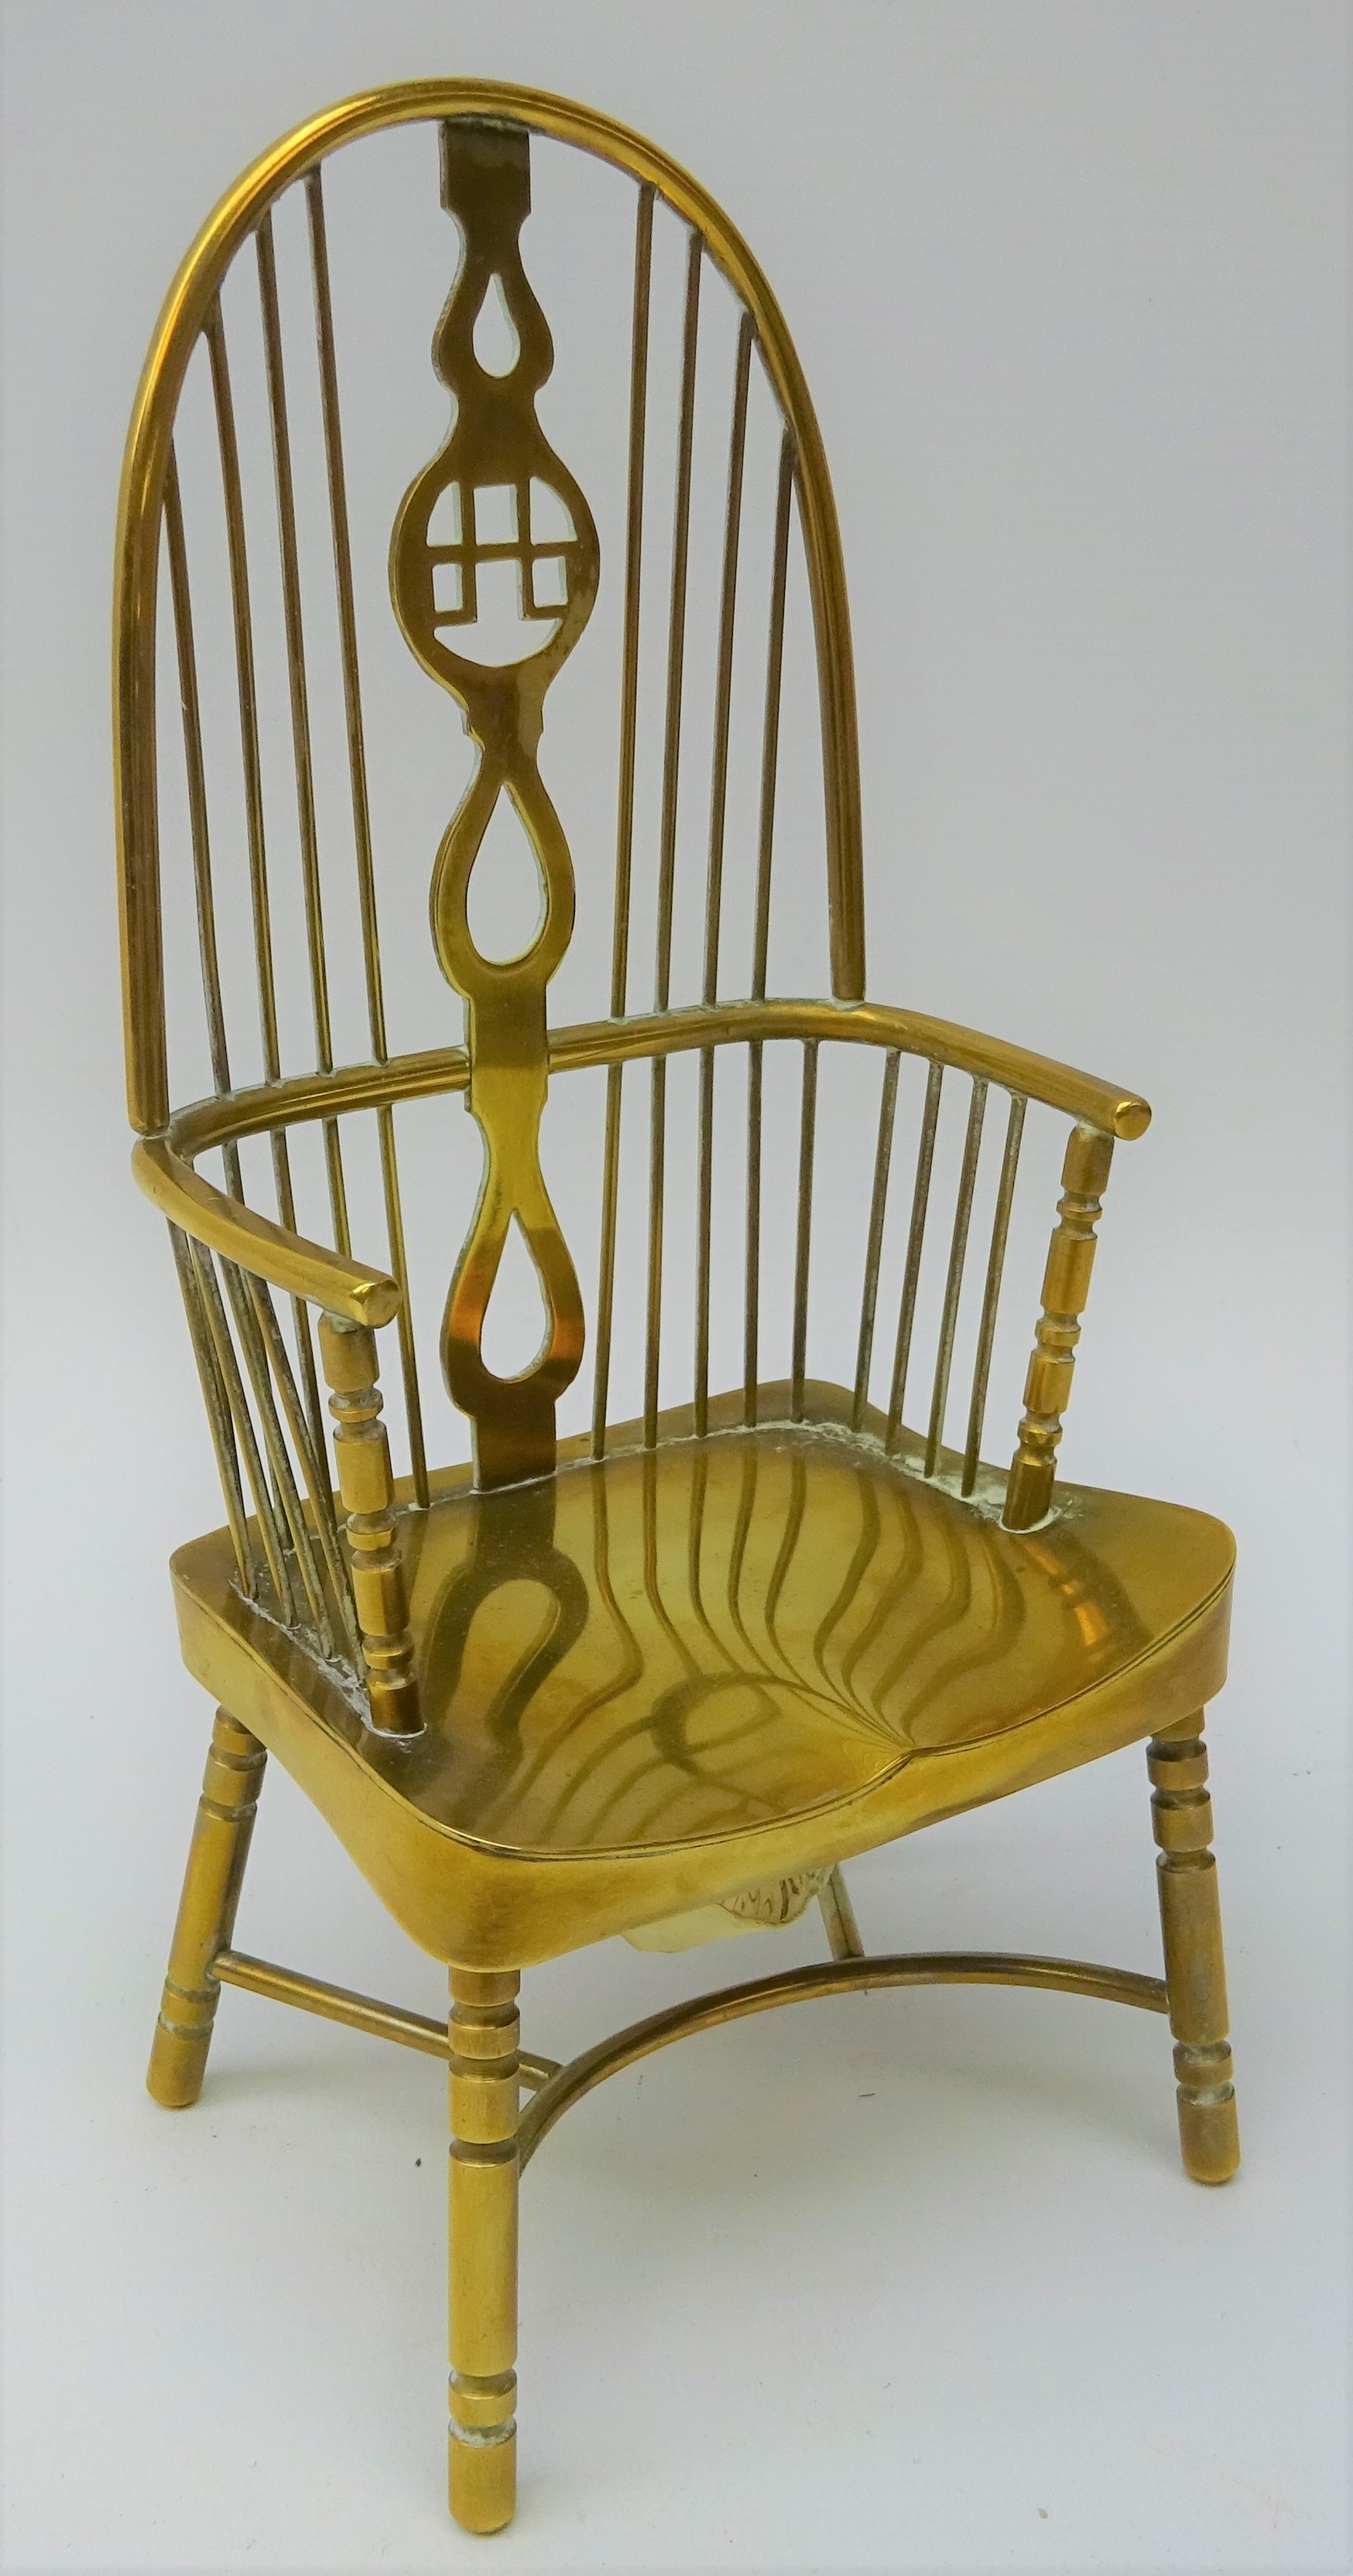 Miniature brass double bow Windsor chair with saddle seat and crinoline stretcher,